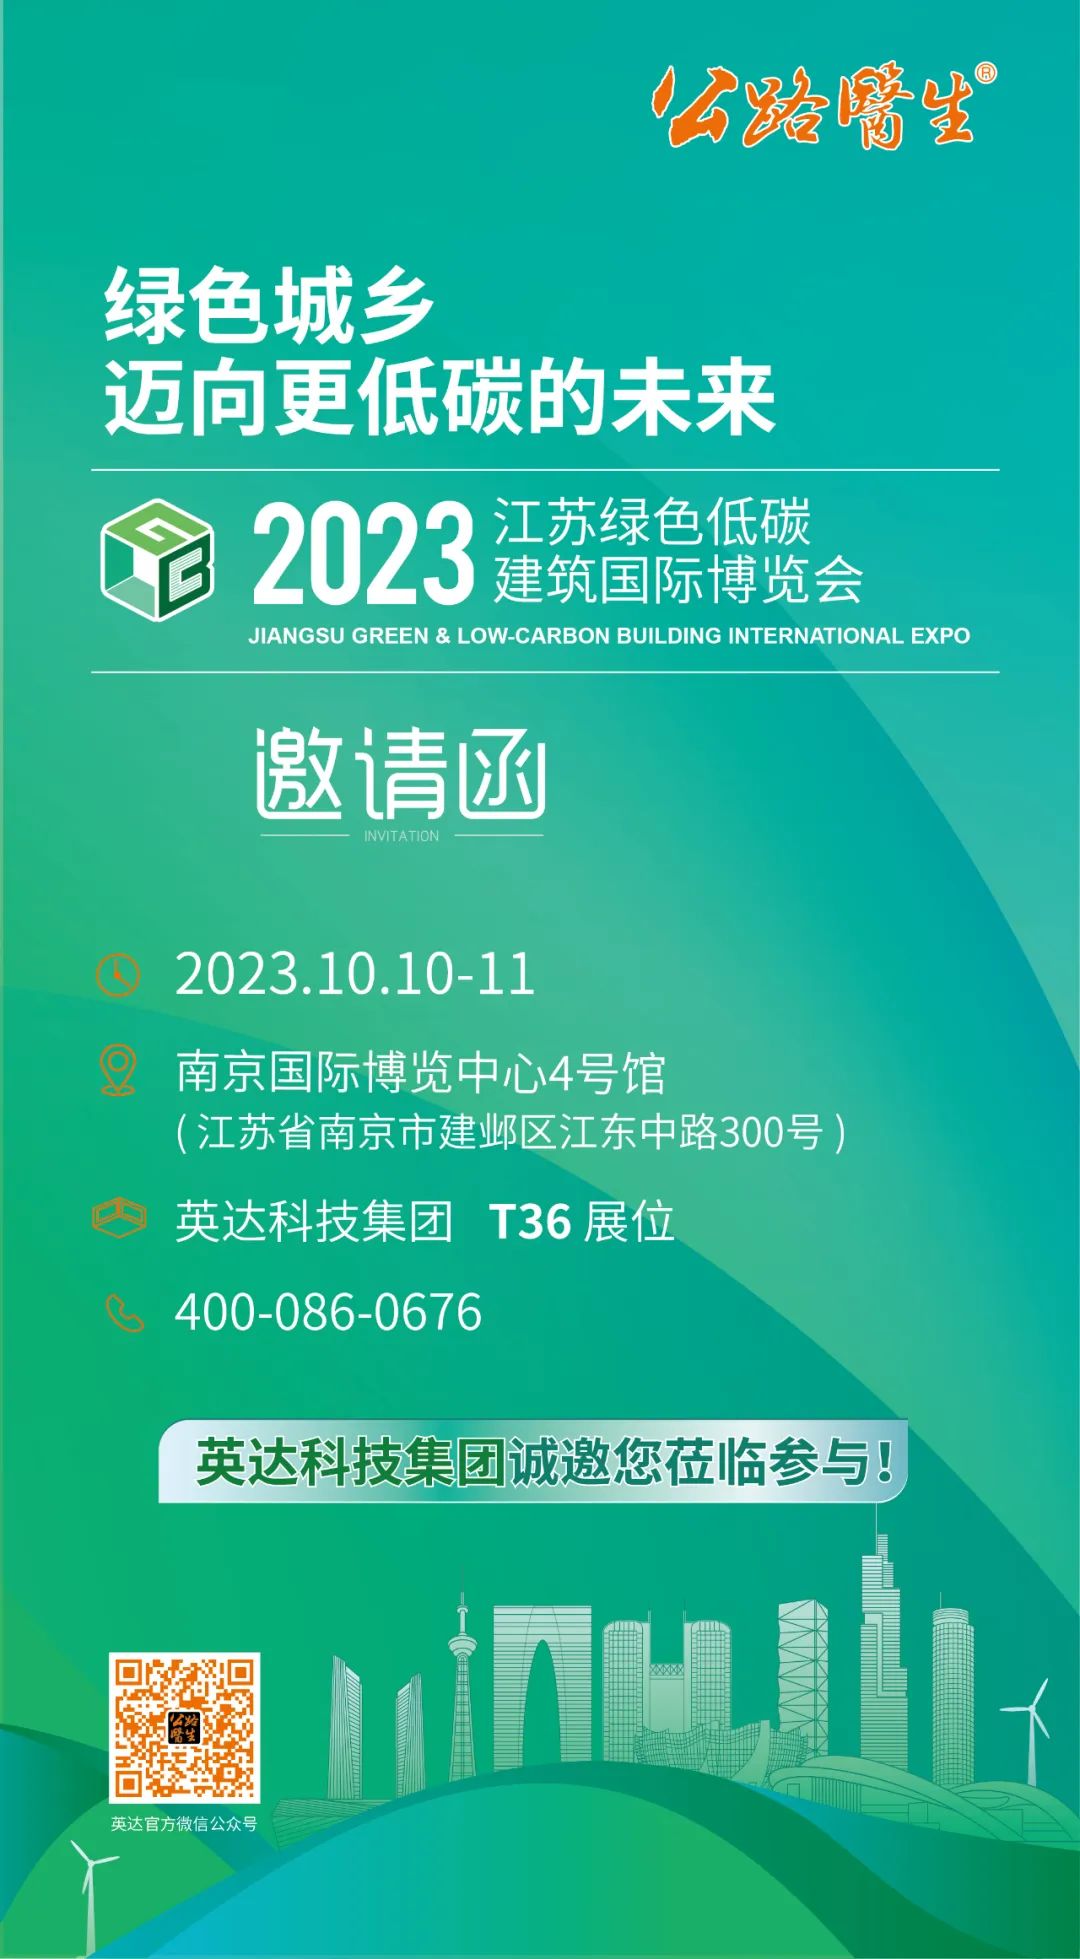 Event Notice | Road Doctor "Seiko Embroidery" Will Appear at 2023 Jiangsu Green Low Carbon Building International Expo!